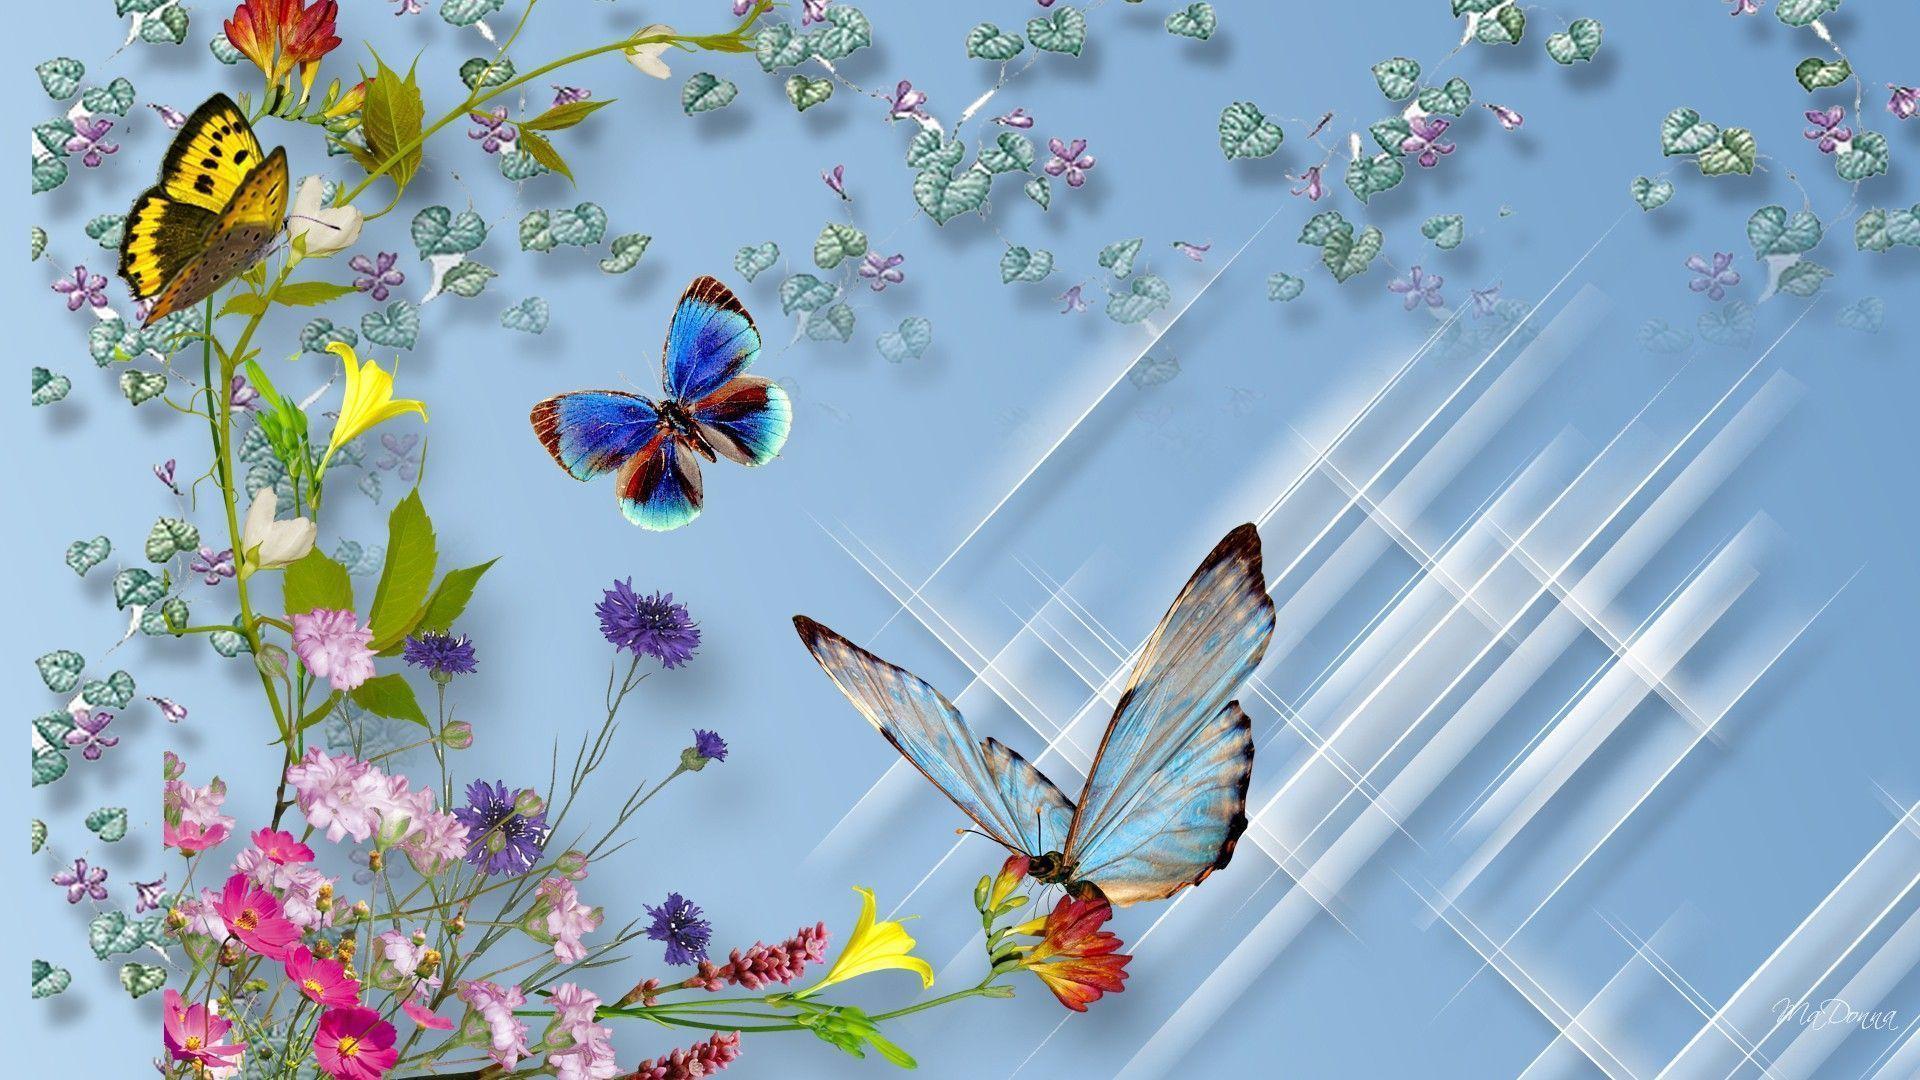 Flowers and Butterflies Wallpaper Free Flowers and Butterflies Background